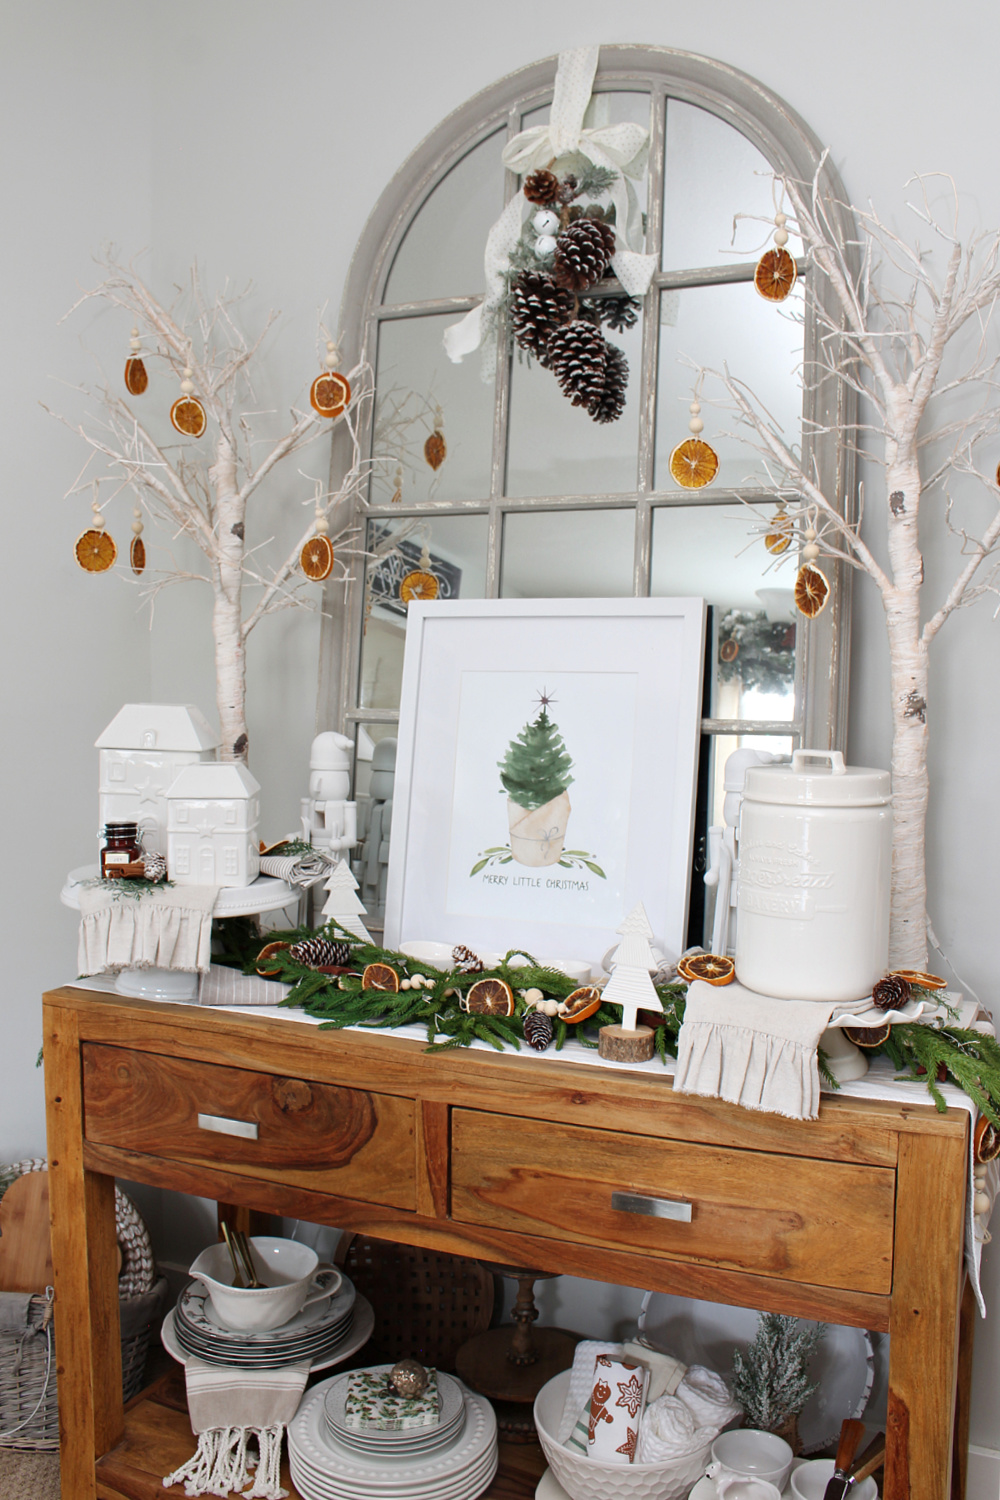 Dining room side board decorated for Christmas with greens and dried oranges.